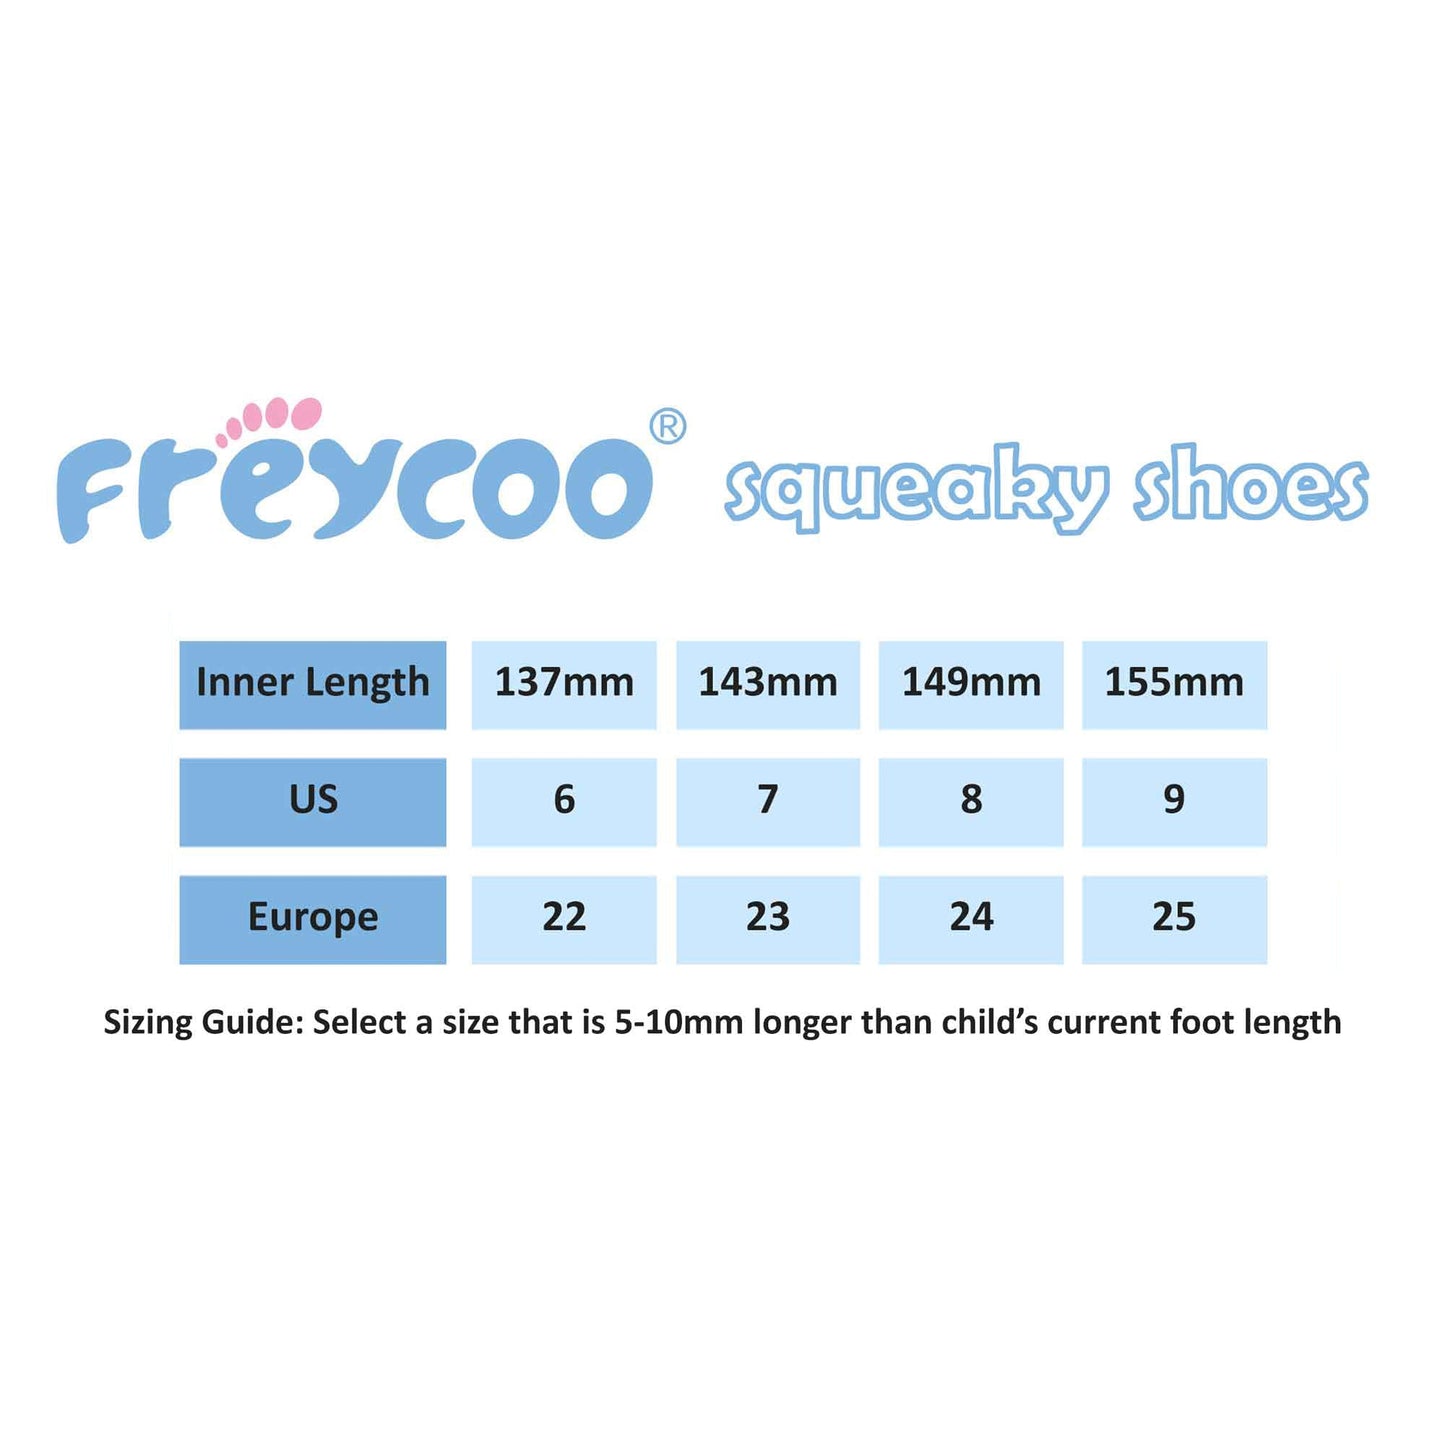 Freycoo - Navy Dennis Squeaky Shoes